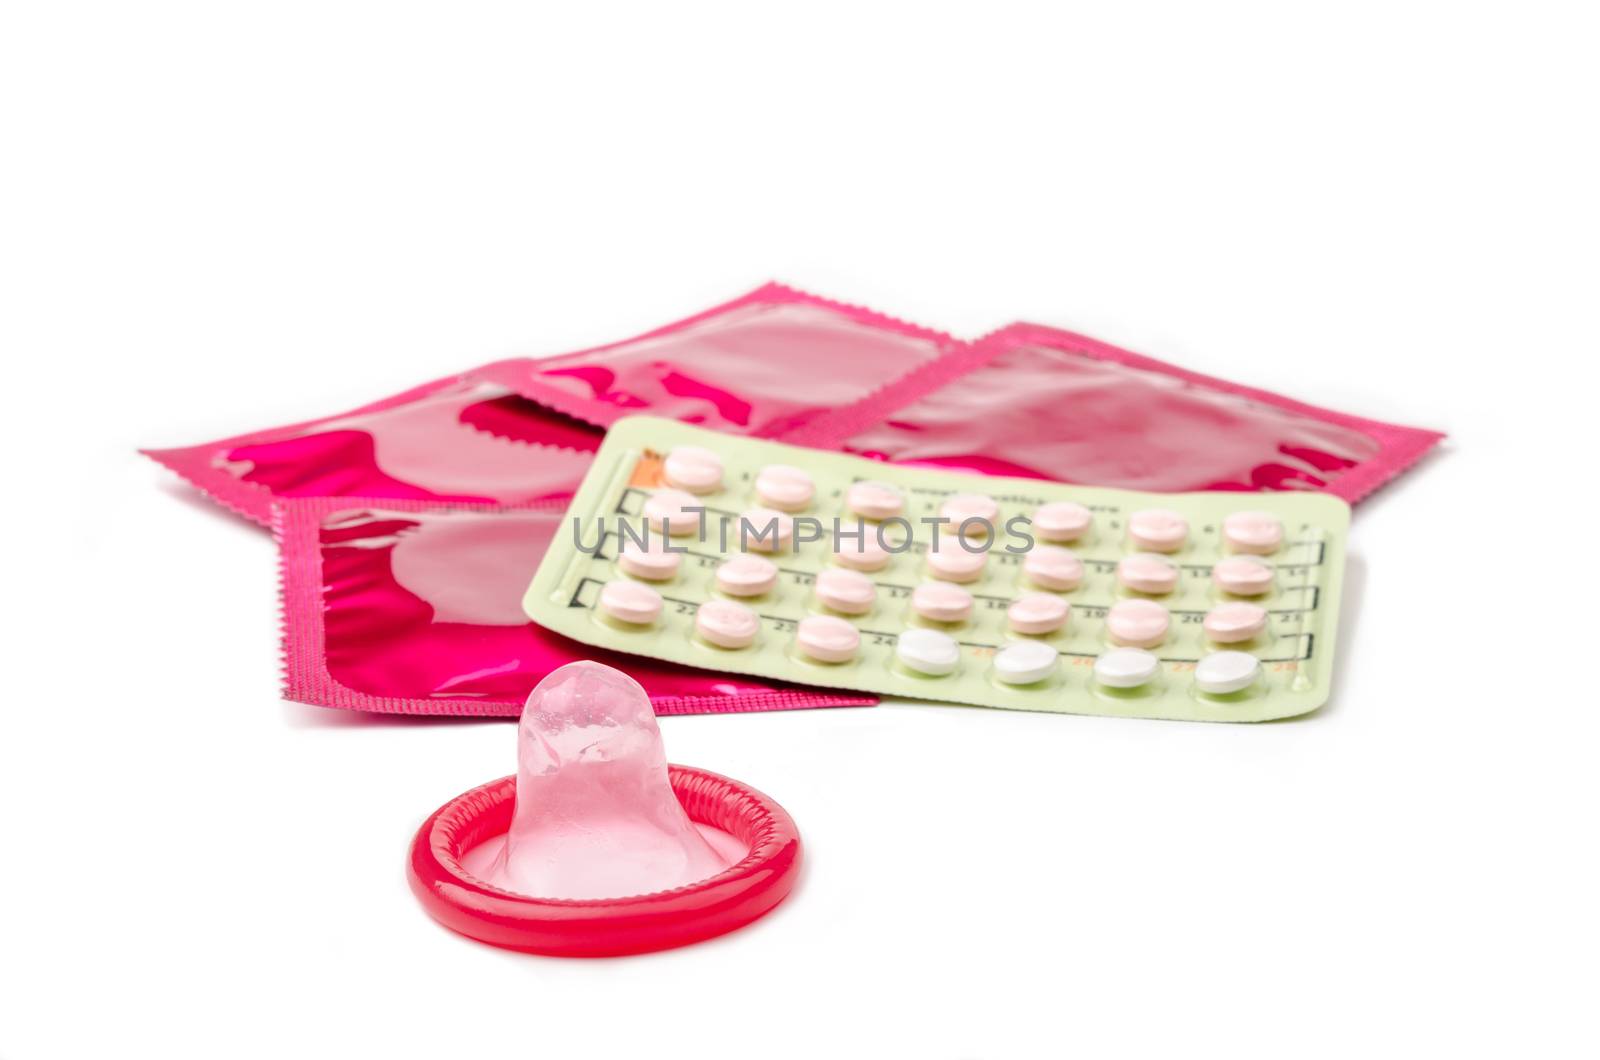 Strip of Contraceptive Pill and condoms on whie background.